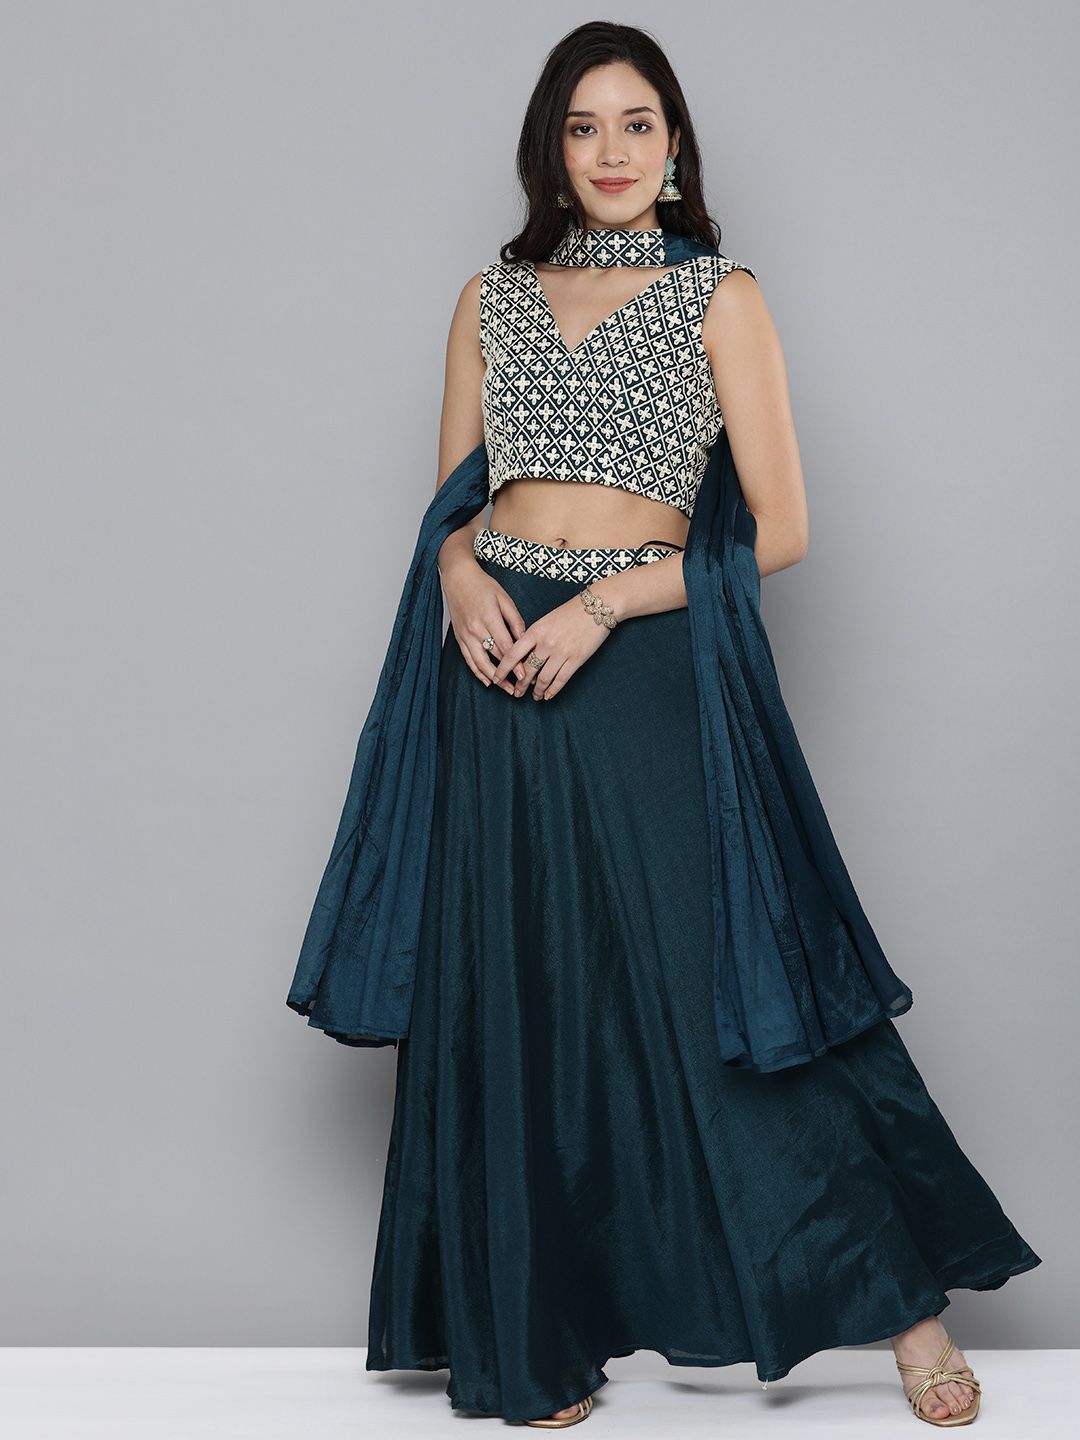 Kvsfab Teal Green Embroidered Semi-Stitched Lehenga &Unstitched Blouse With Dupatta Price in India